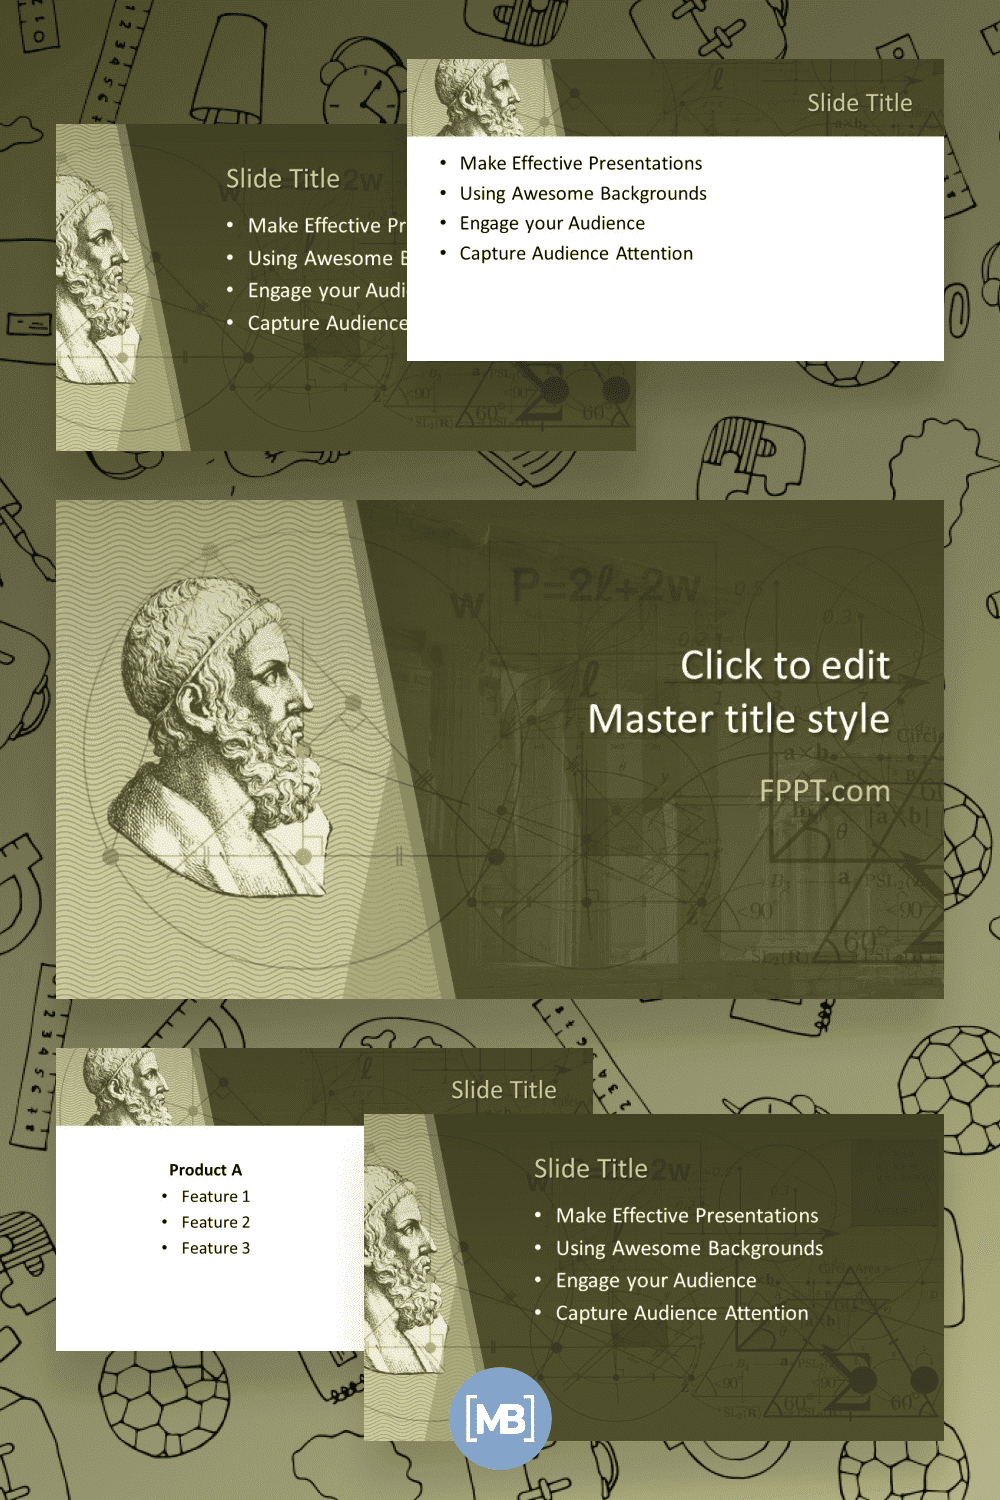 Archimedes powerpoint template.